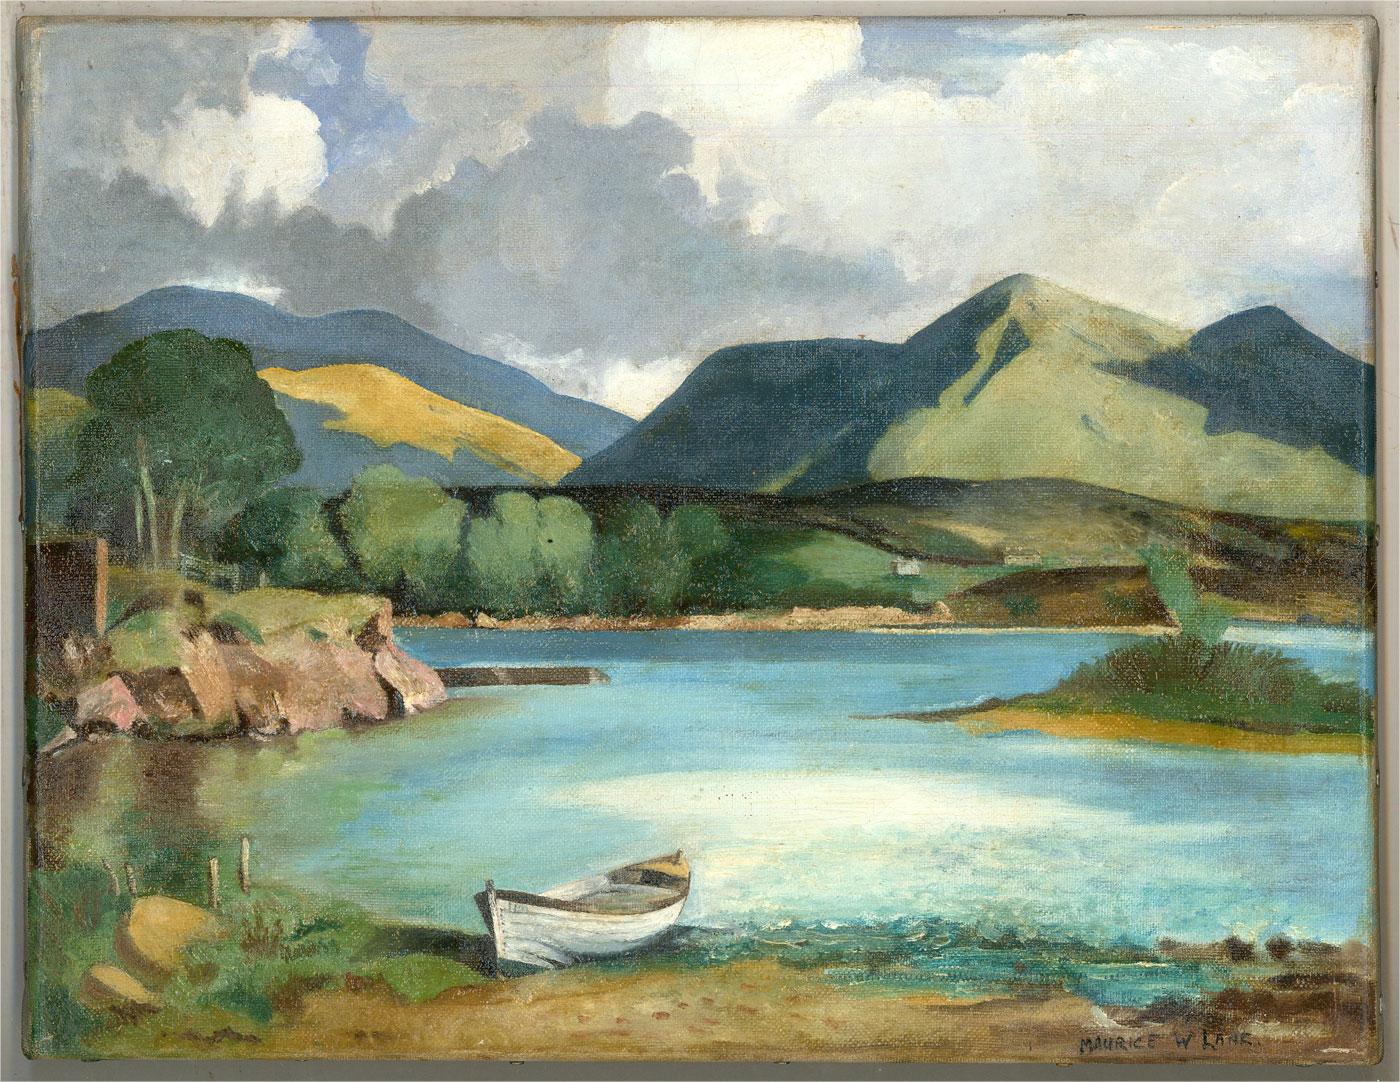 An expressive and stylised landscape in oil with nods to the style of Paul Nash. The scene shows a panoramic view of a beautiful lake surrounded by softly rolling hills with storm clouds brooding overhead. The artist has signed to the lower left